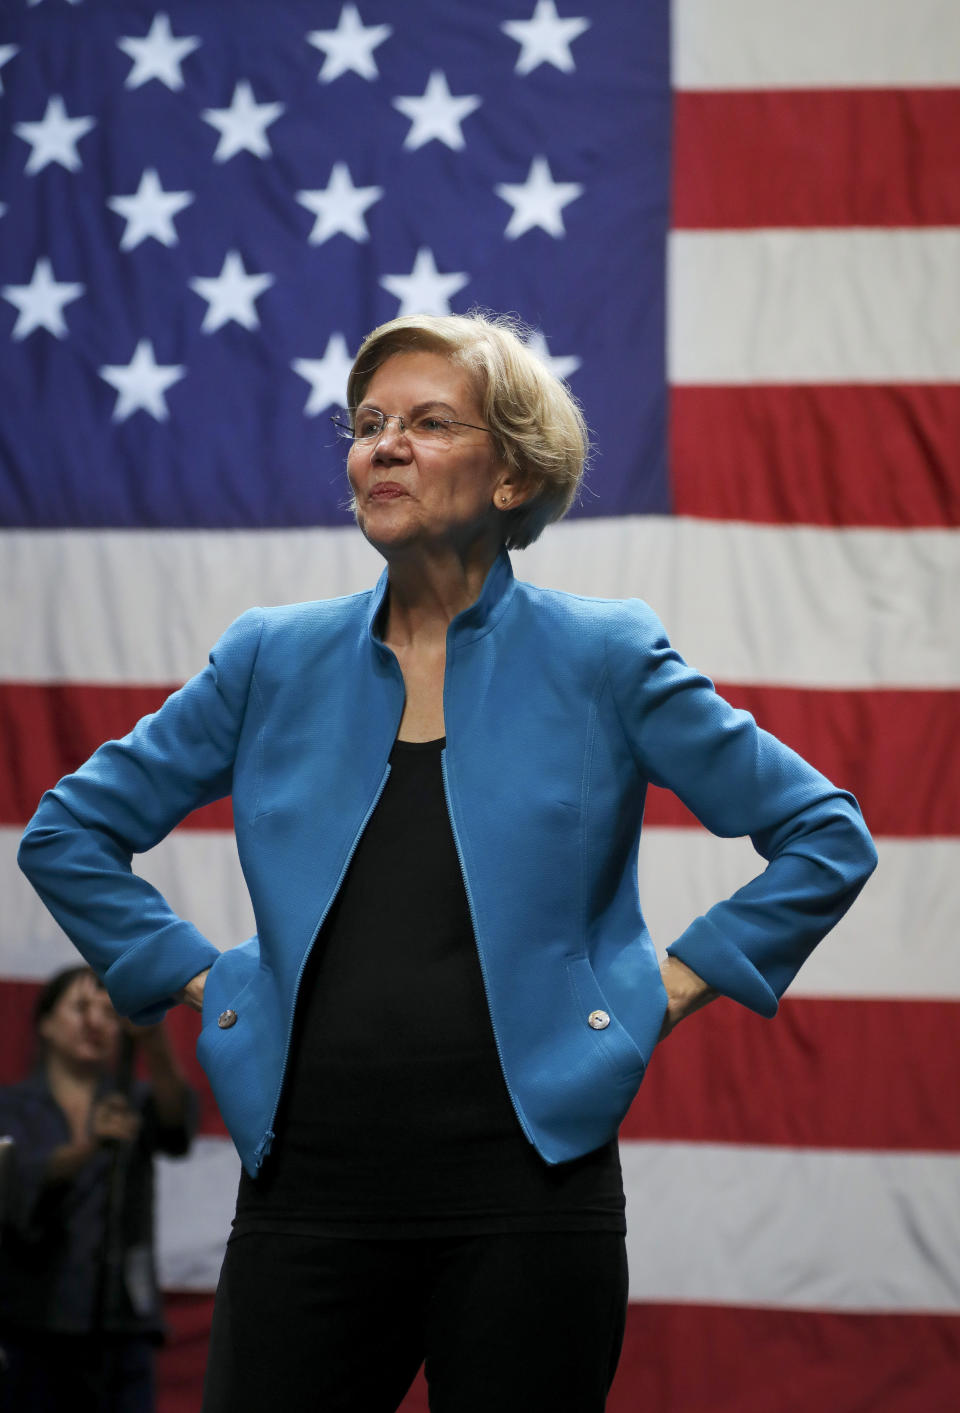 Presidential candidate Sen. Elizabeth Warren, D-Mass., addresses supporters, Tuesday, Jan. 7, 2020, during a campaign stop at Brooklyn's King Theatre in New York. (AP Photo/Bebeto Matthews)